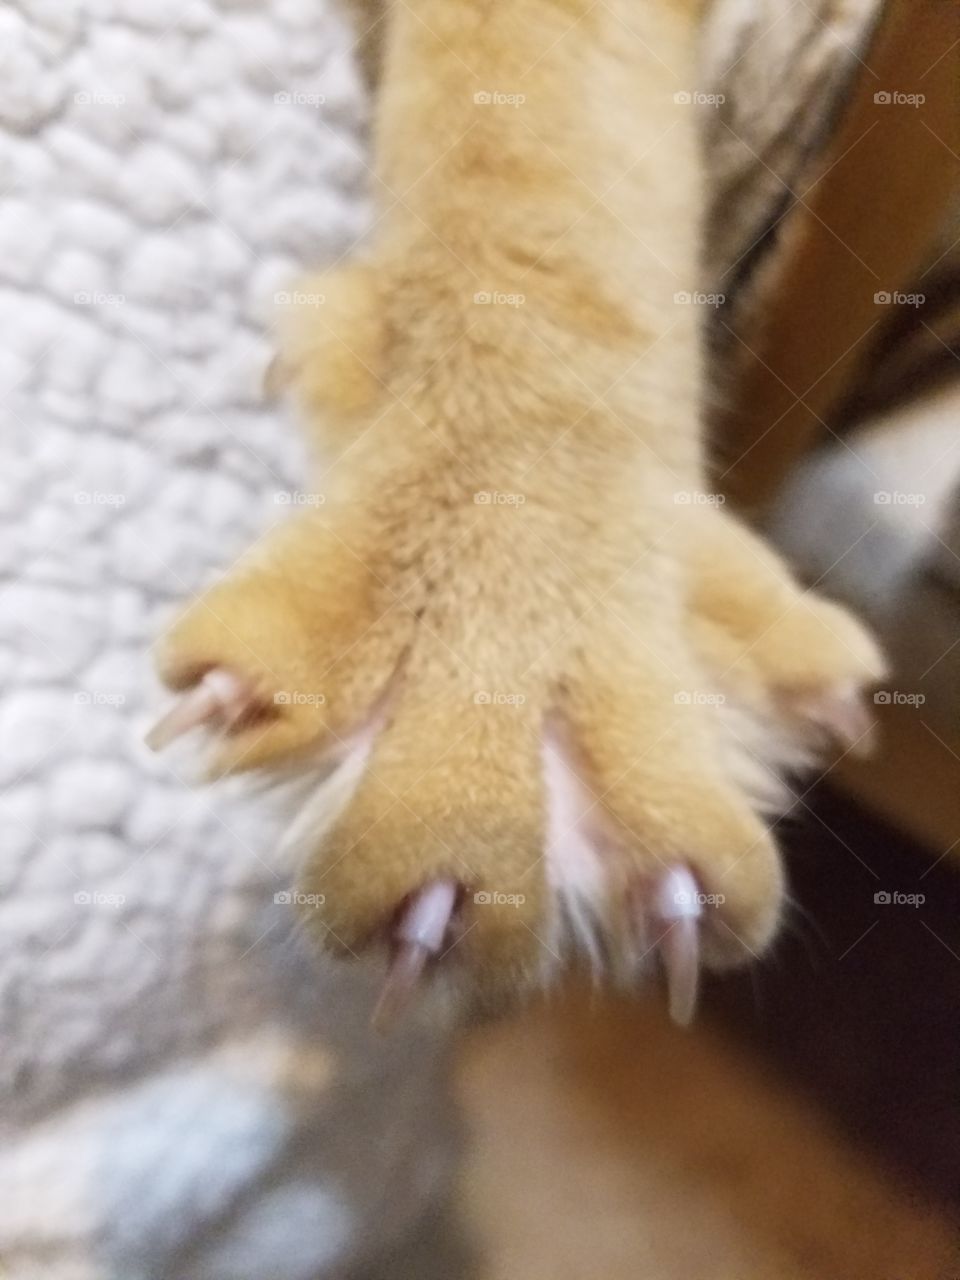 This is the same paw at a slightly different angle and distance